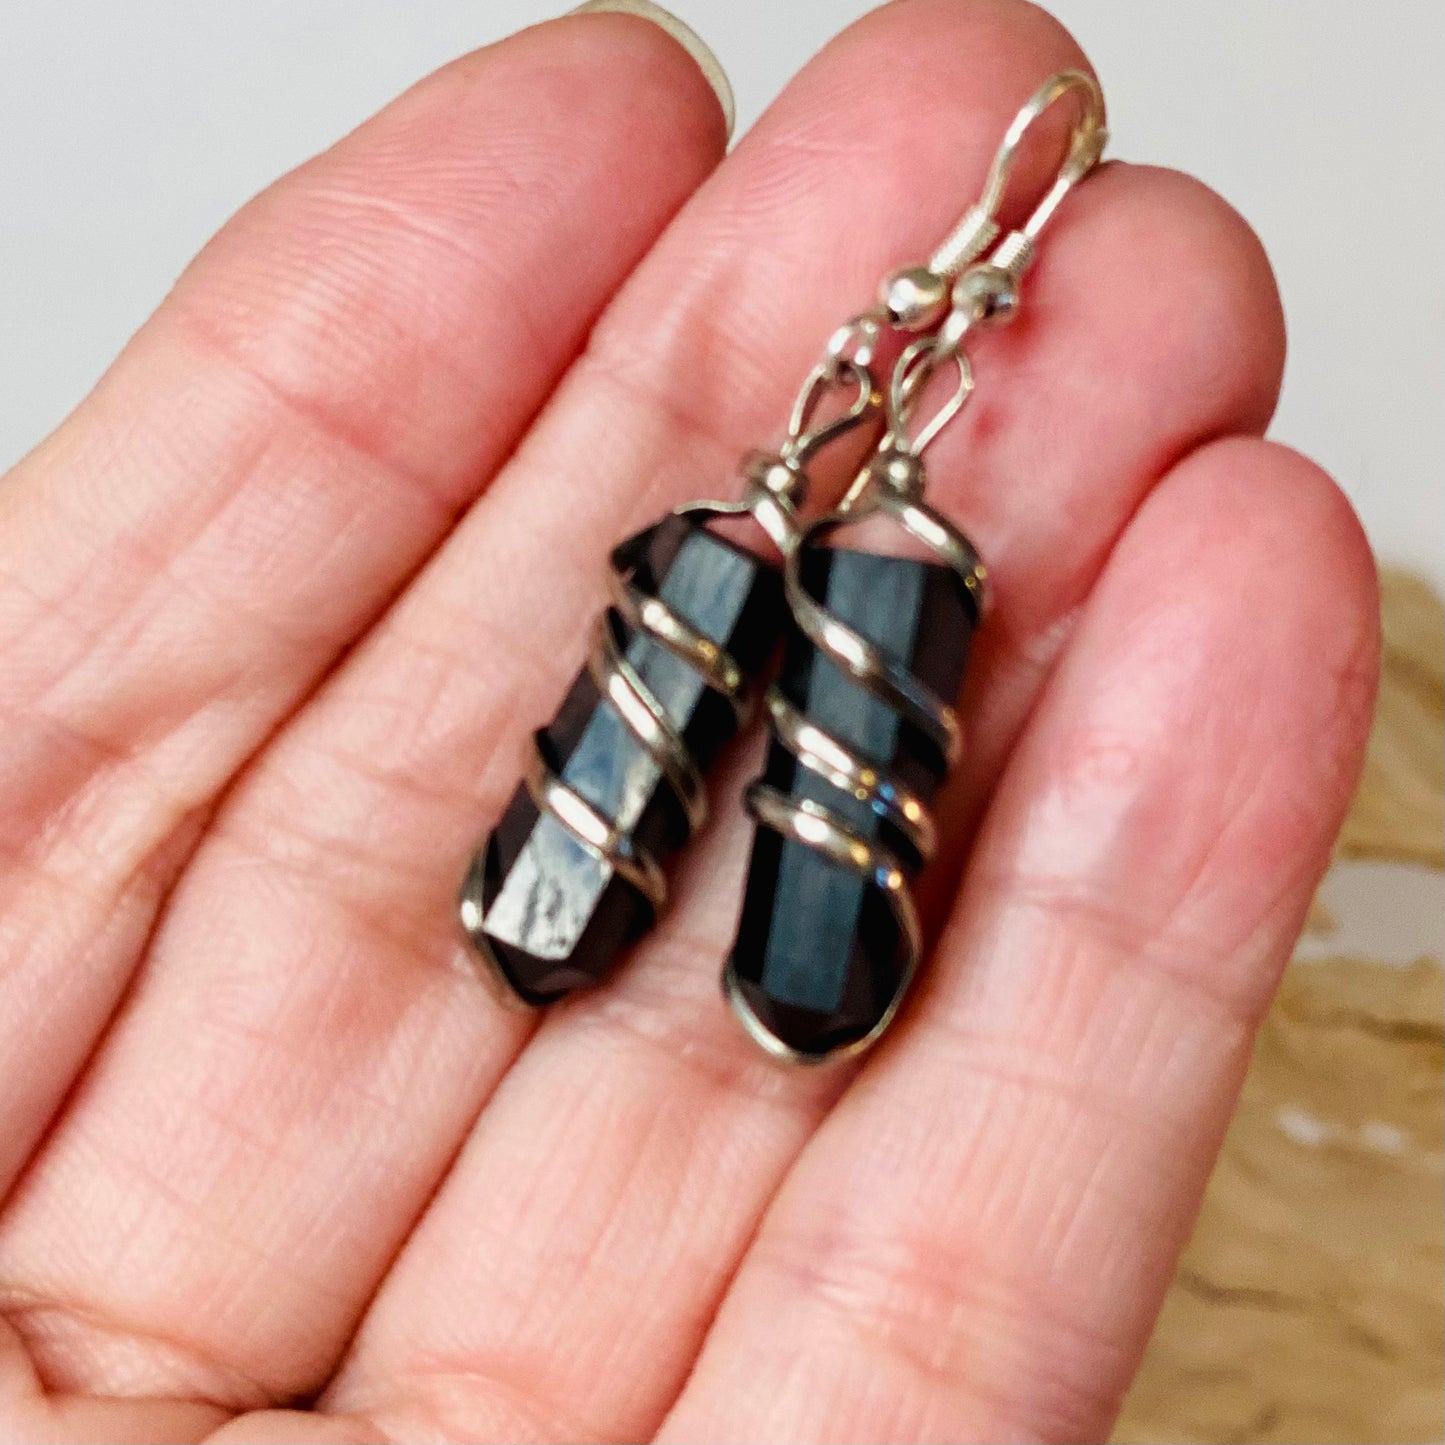 Grounding Energies: Shungite Spiral Earrings for Protection and Balance